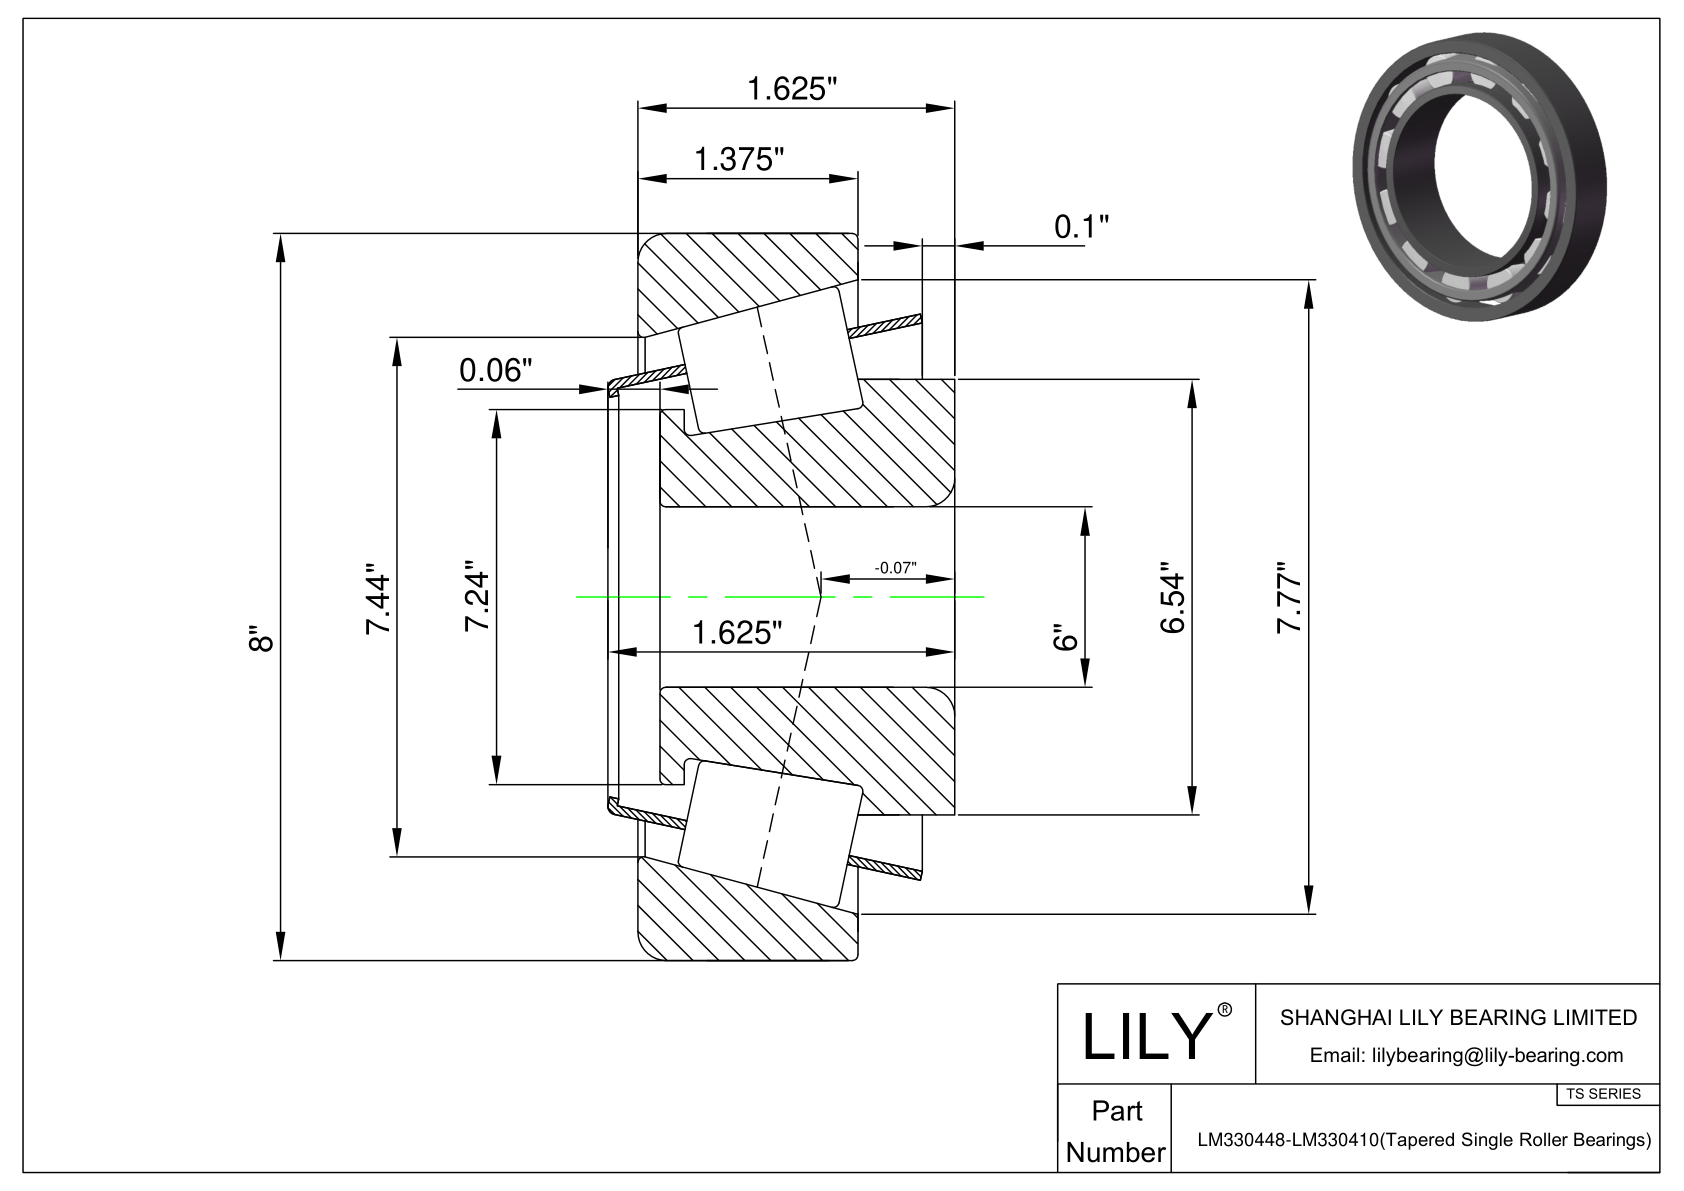 LM330448-LM330410 TS (Tapered Single Roller Bearings) (Imperial) cad drawing